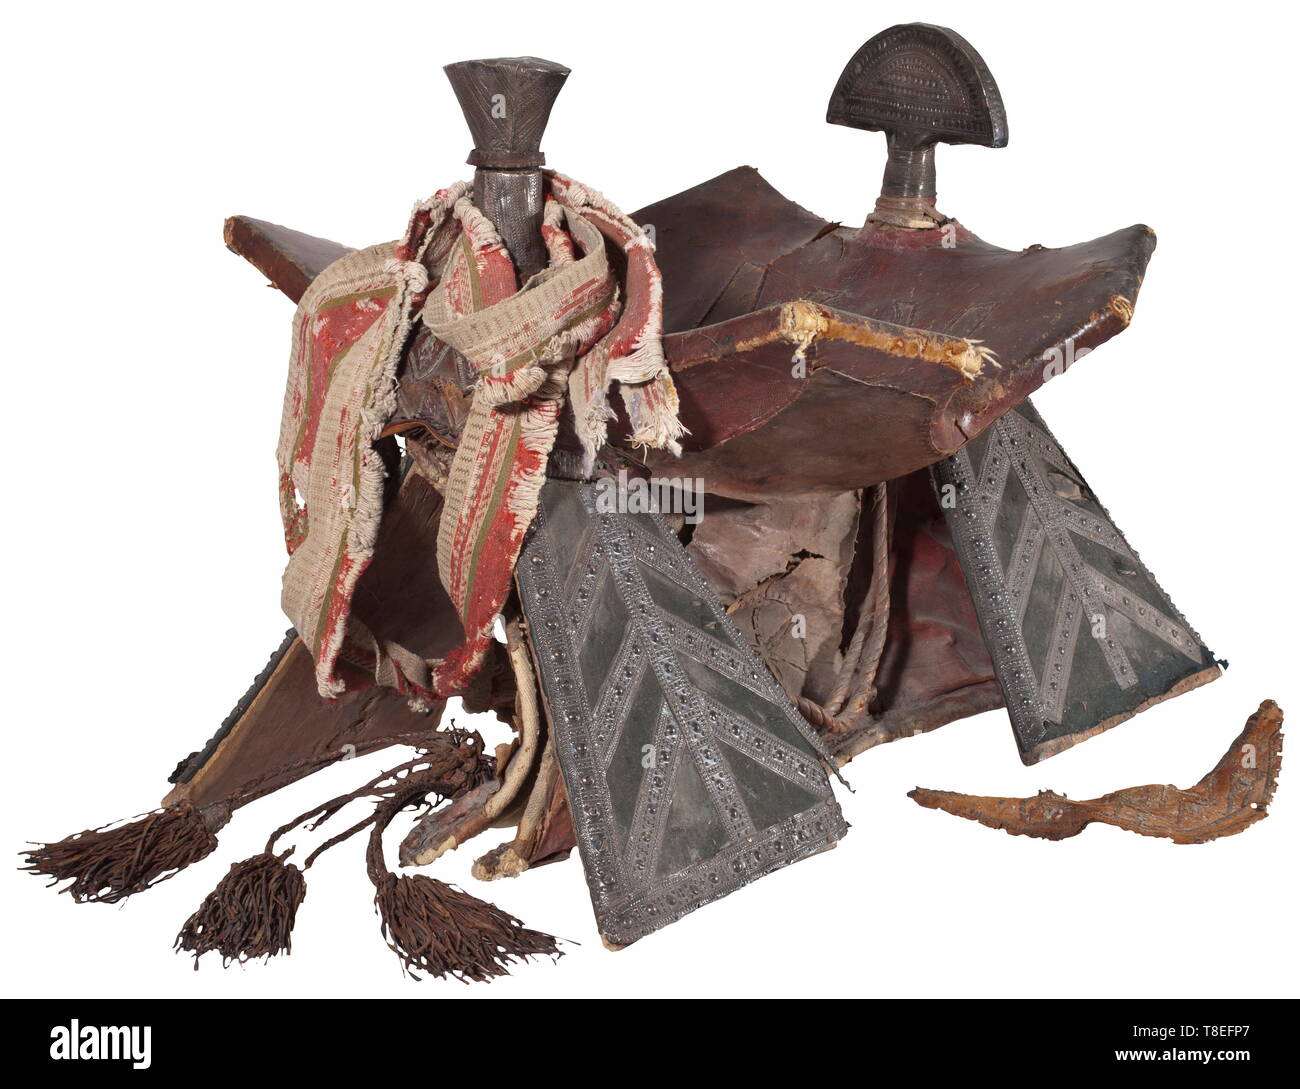 A Sudanese camel saddle, 19th century Wooden framework covered with textile and leather respectively studded with richly punched sheet silver. The seating surface covered with variously coloured leather. Surcingle made from braided leather and textile. Distinct traces of use and age. Length 64 cm, height 52 cm. historic, historical, Africa, African, weapon, arms, weapons, arms, fighting device, 19th century, Additional-Rights-Clearance-Info-Not-Available Stock Photo